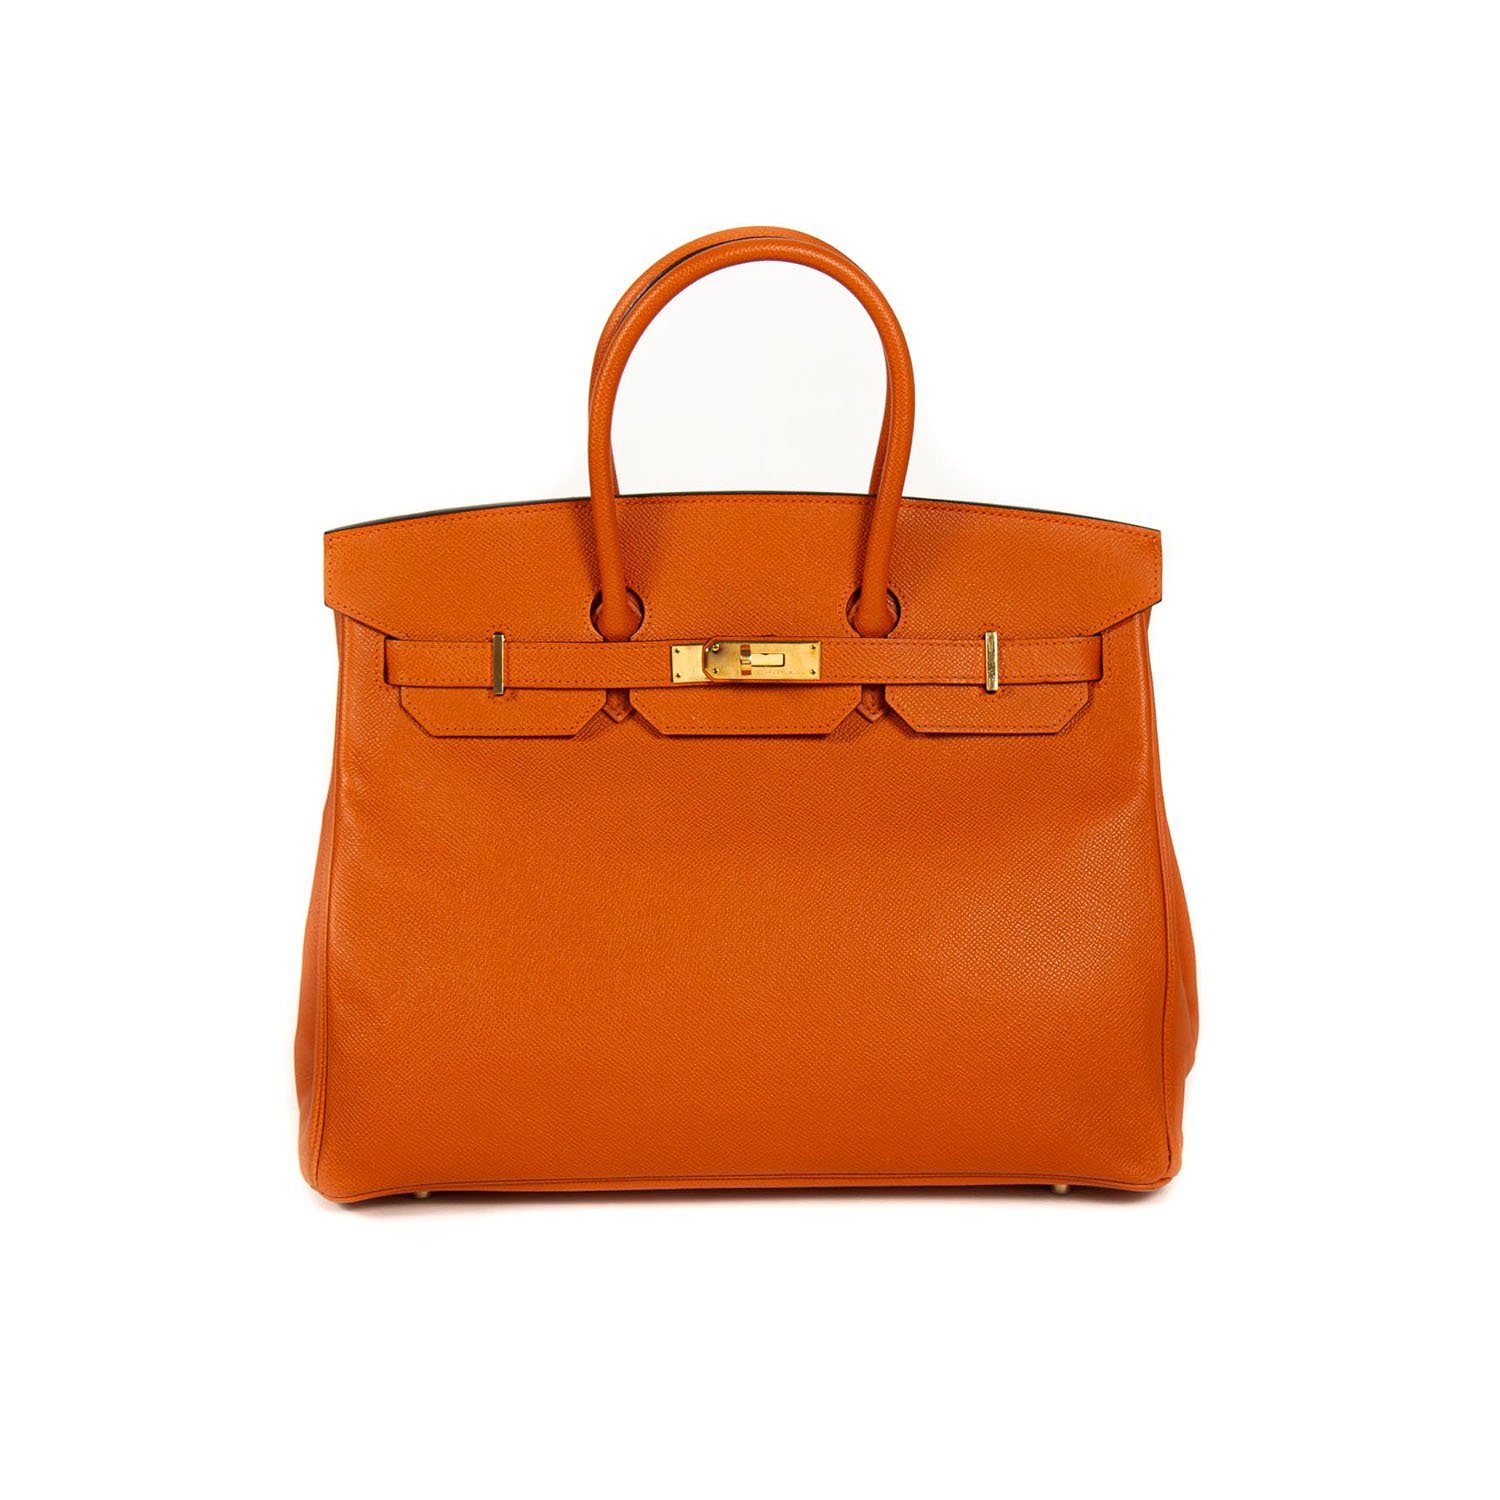 Buy Pre-owned Luxury Handbags & Fashion Accessories Online India